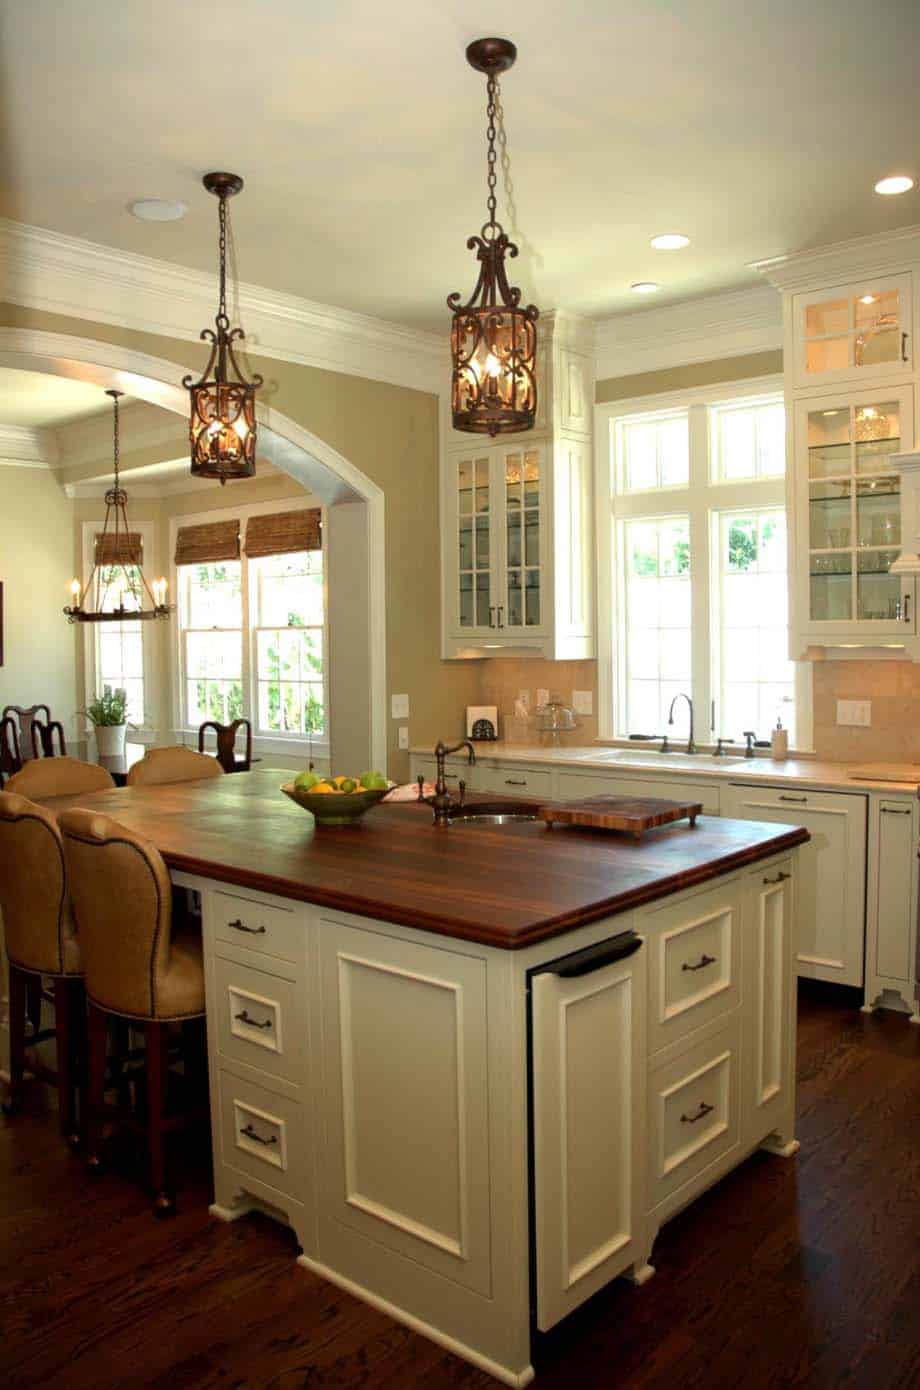 Simple Kitchen Island Ideas for Living room